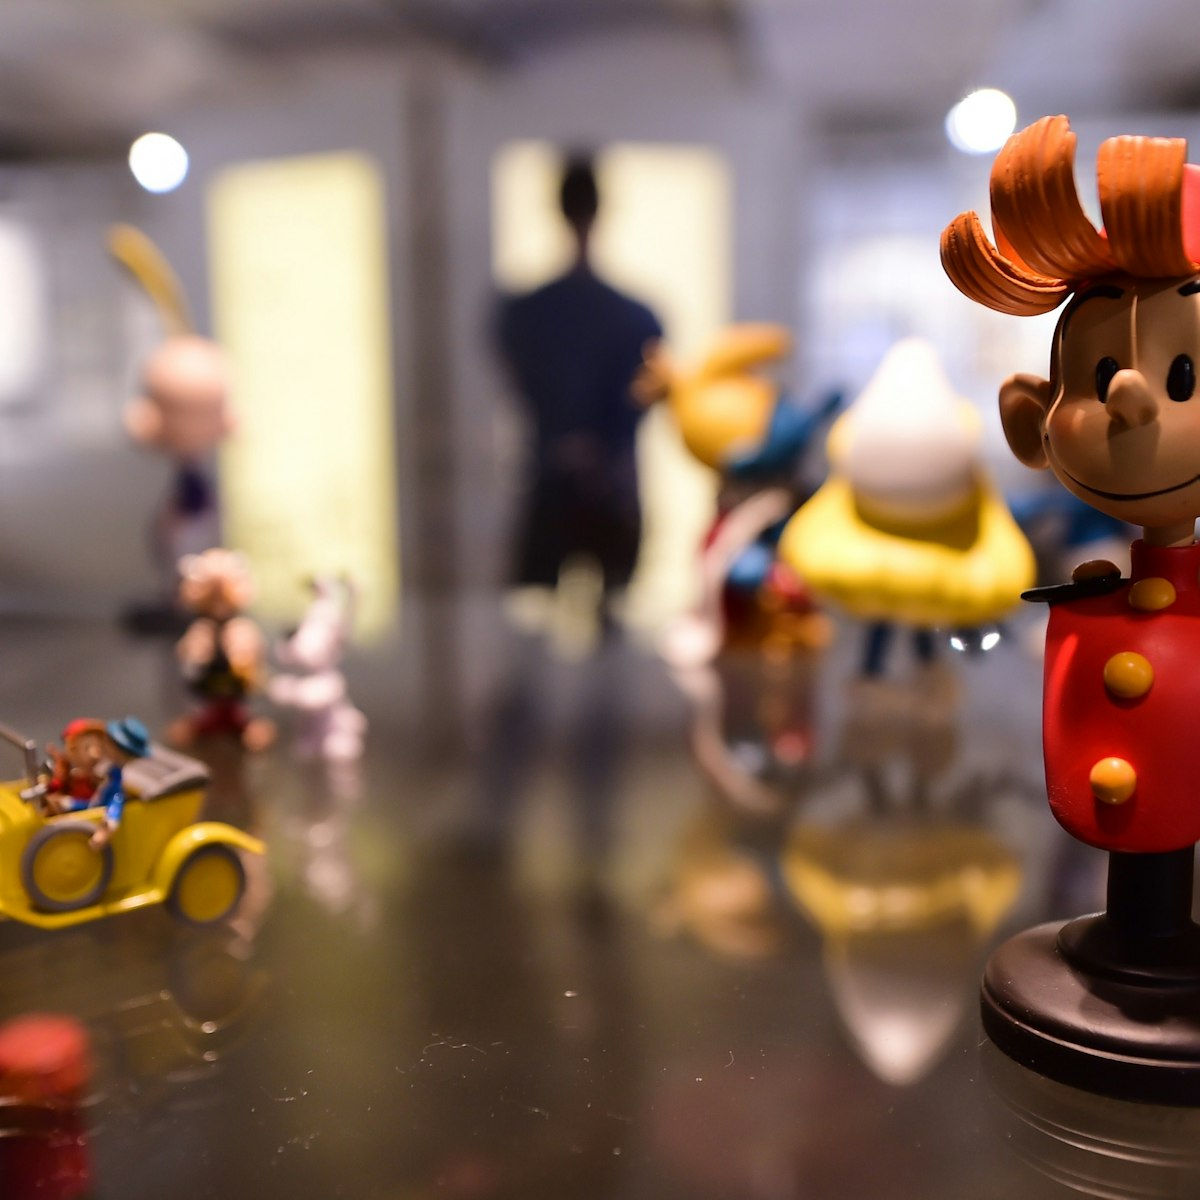 TO GO WITH AFP STORY BY PHILIPPE SIUBERSKI .A figurine of cartoon character "Spirou" is seen in the "Centre Belge de la Bande Dessinee" (Belgian Comic Strip Center) on October 3, 2014 in Brussels, as it marks its 25th anniversary. The museum, one of the largest worldwide dedicated to comic strip art, marks its 25th anniversary with a series of special exhibitions and happenings. Spirou has been written and drawn since 1938 by a succession of artists, as Rob-Vel, Jije, Franquin, Yoann, Vehlmann, Schwartz and Bravo for comics publisher Dupuis. AFP PHOTO/ EMMANUEL DUNAND == RESTRICTED TO EDITORIAL USE, MANDATORY CREDIT OF THE ARTIST, TO ILLUSTRATE THE EVENT AS SPECIFIED IN THE CAPTION ==        (Photo credit should read EMMANUEL DUNAND/AFP/Getty Images)